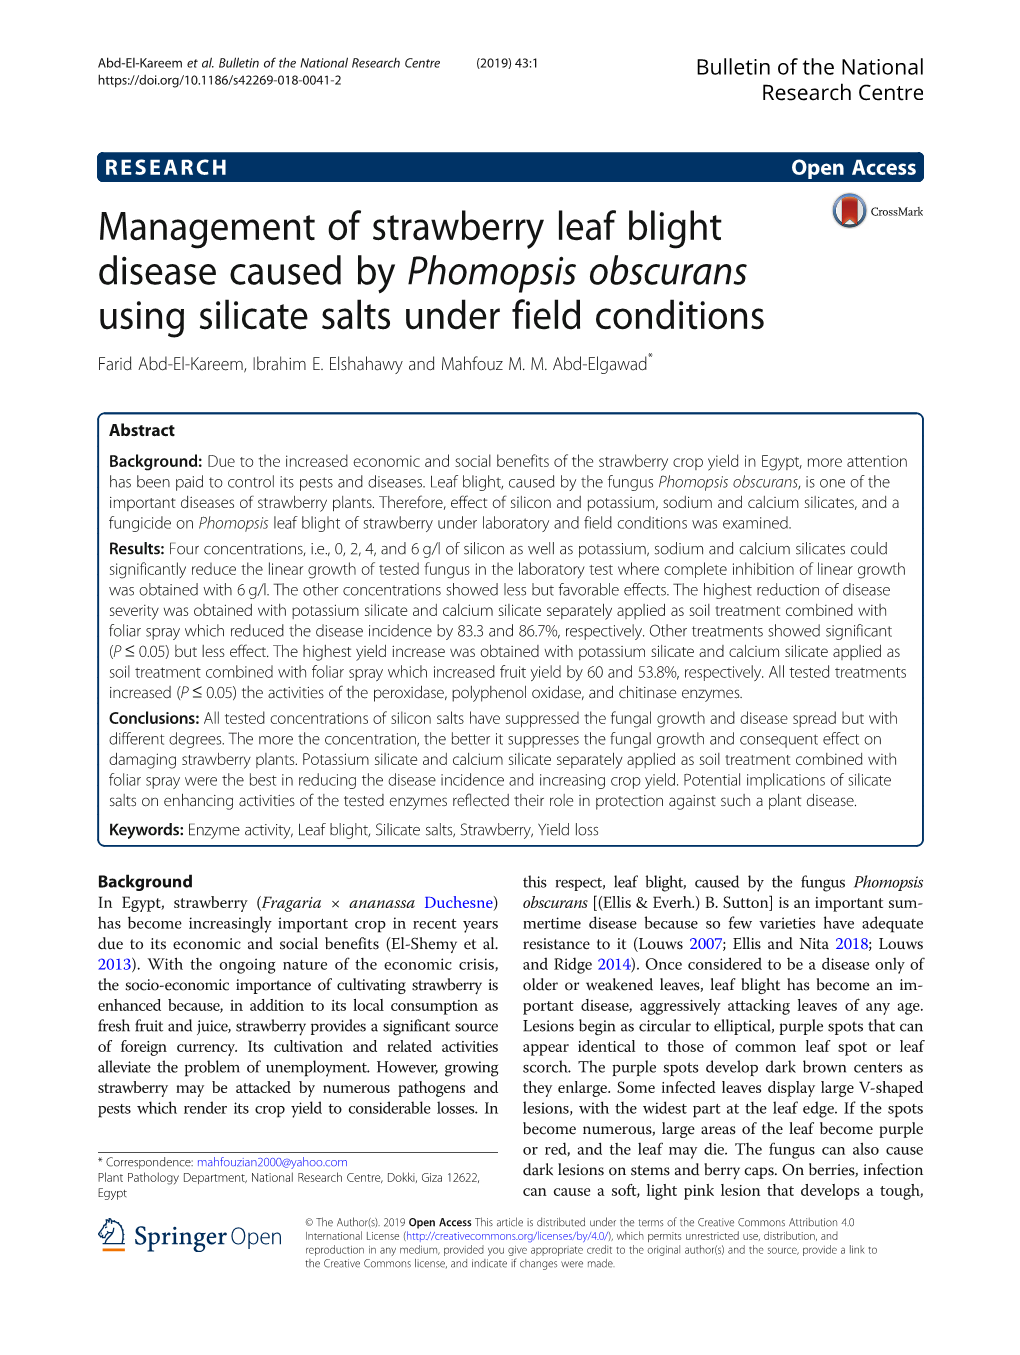 Management of Strawberry Leaf Blight Disease Caused by Phomopsis Obscurans Using Silicate Salts Under Field Conditions Farid Abd-El-Kareem, Ibrahim E